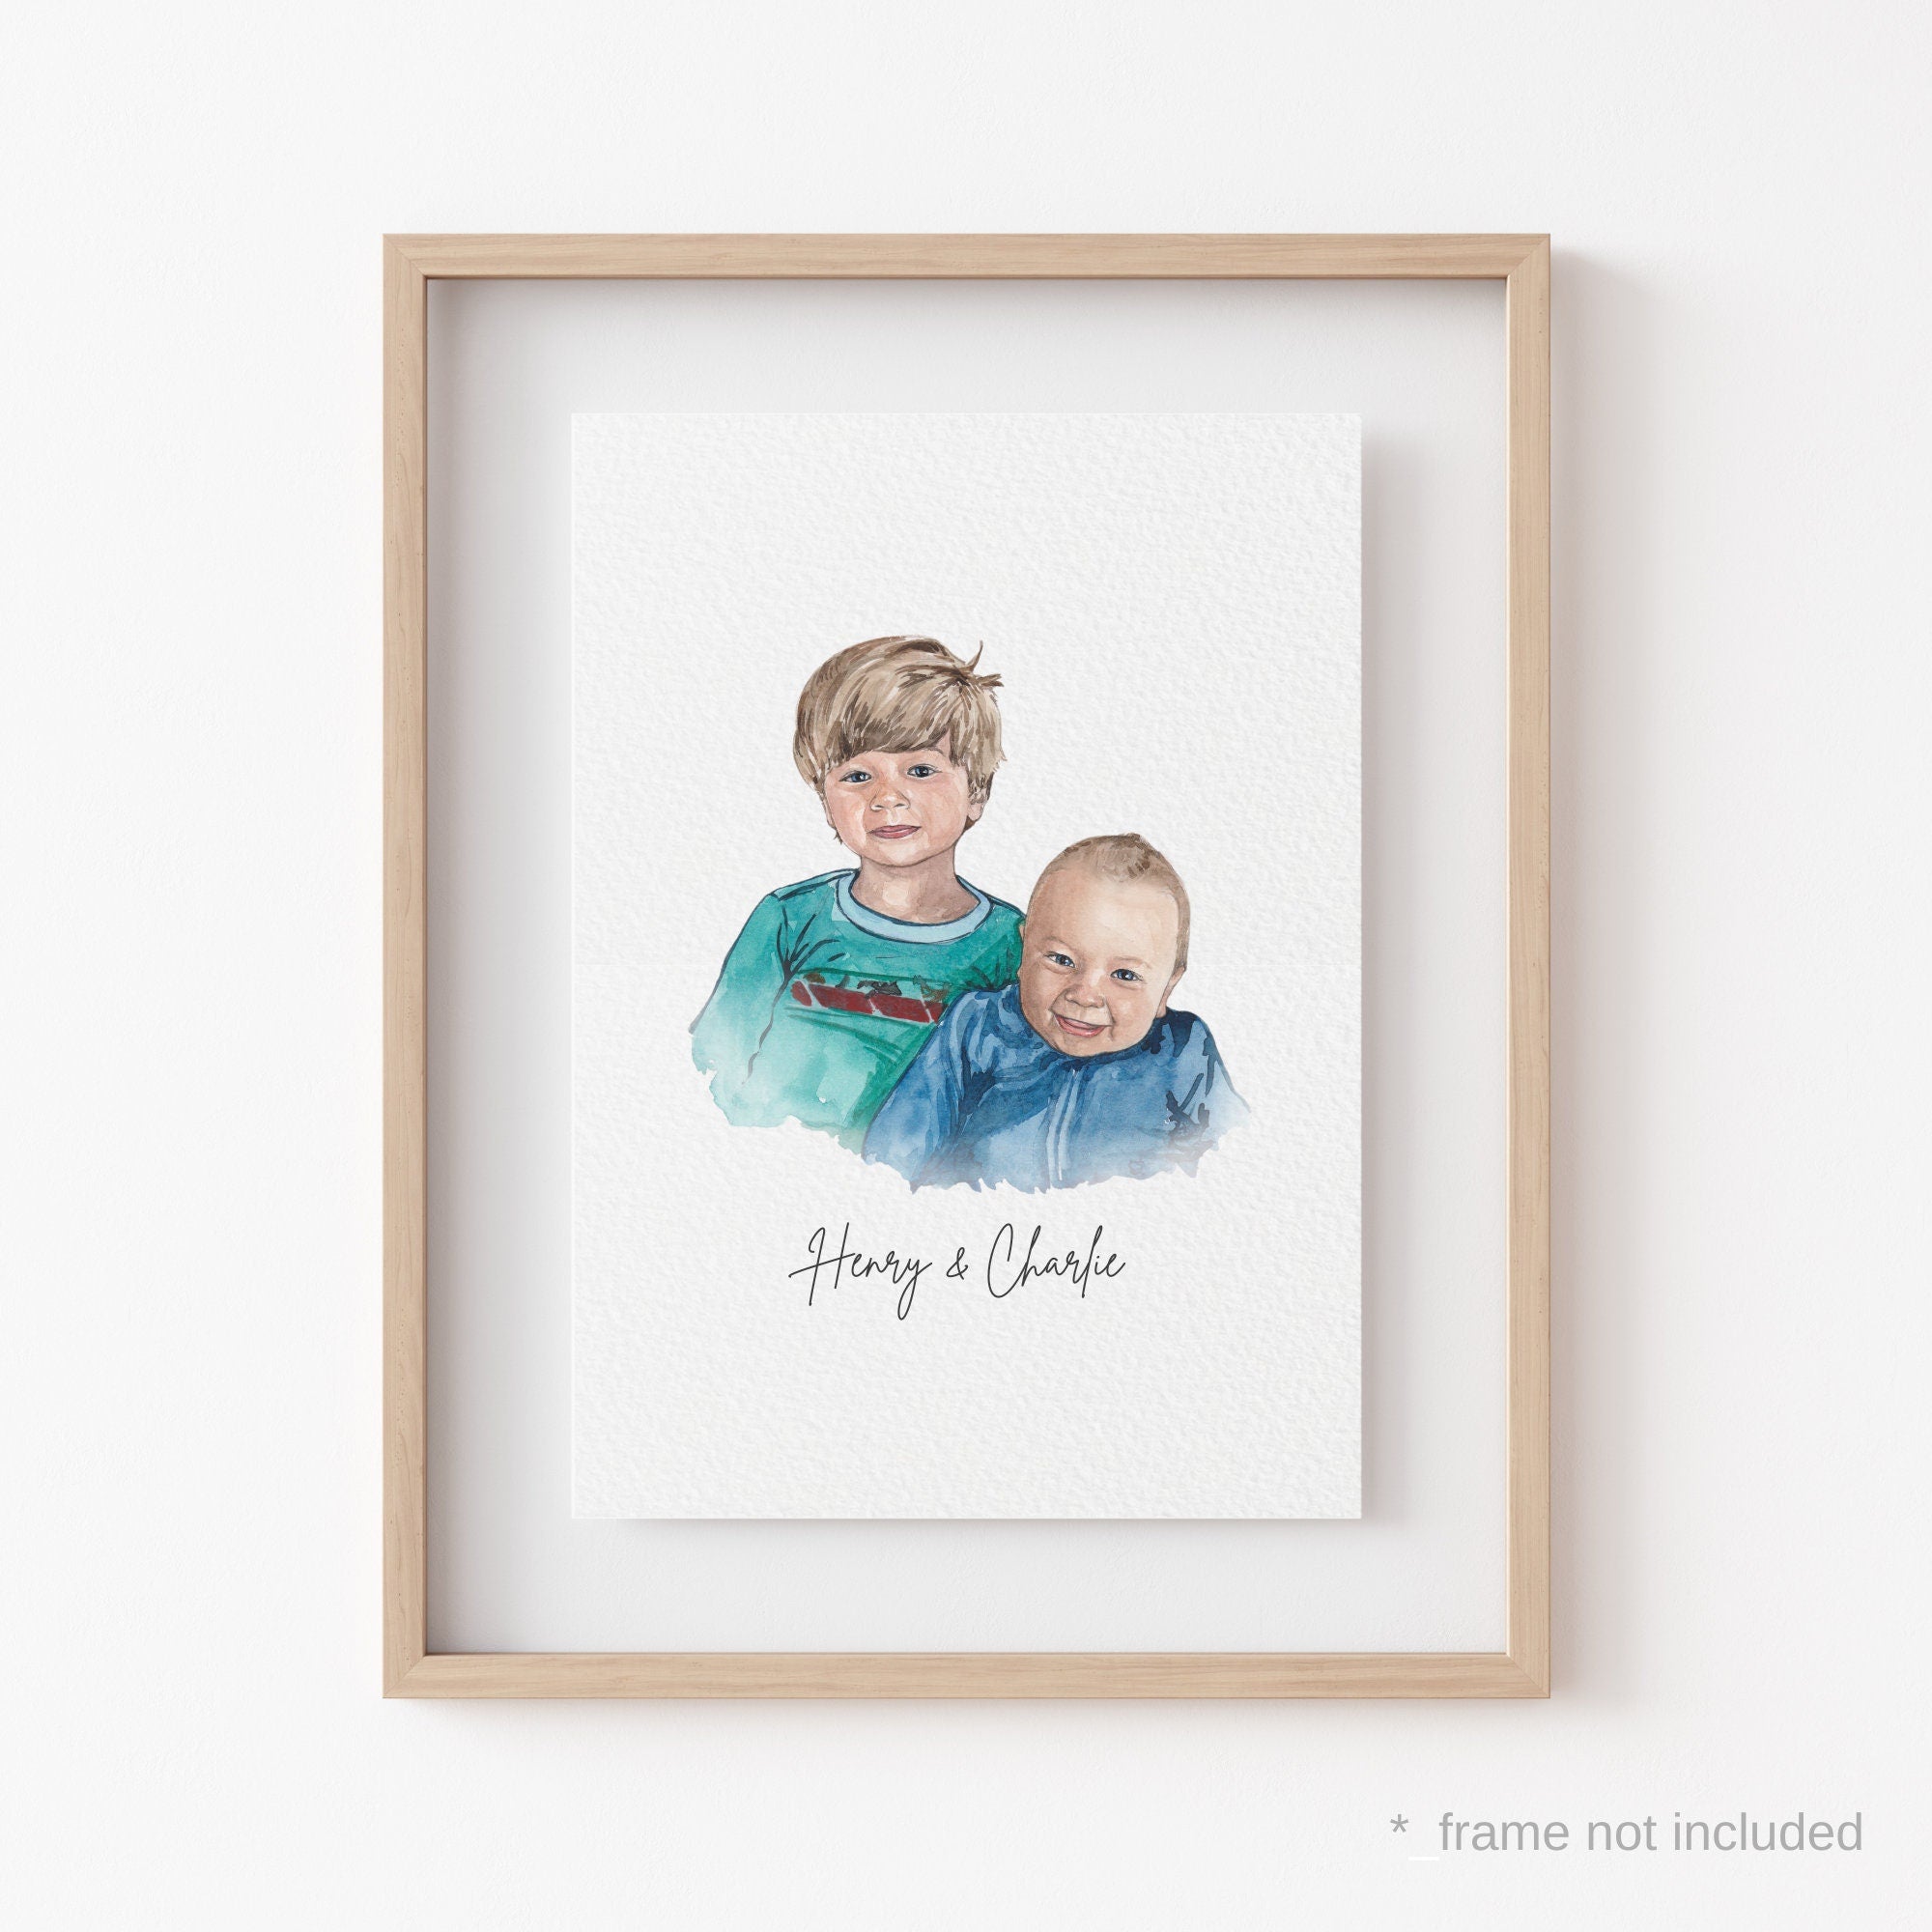 Custom Watercolor Painting Print, Family Portrait, Custom Portrait From Photo, Portraits From Photos, Personalized Gifts, Father